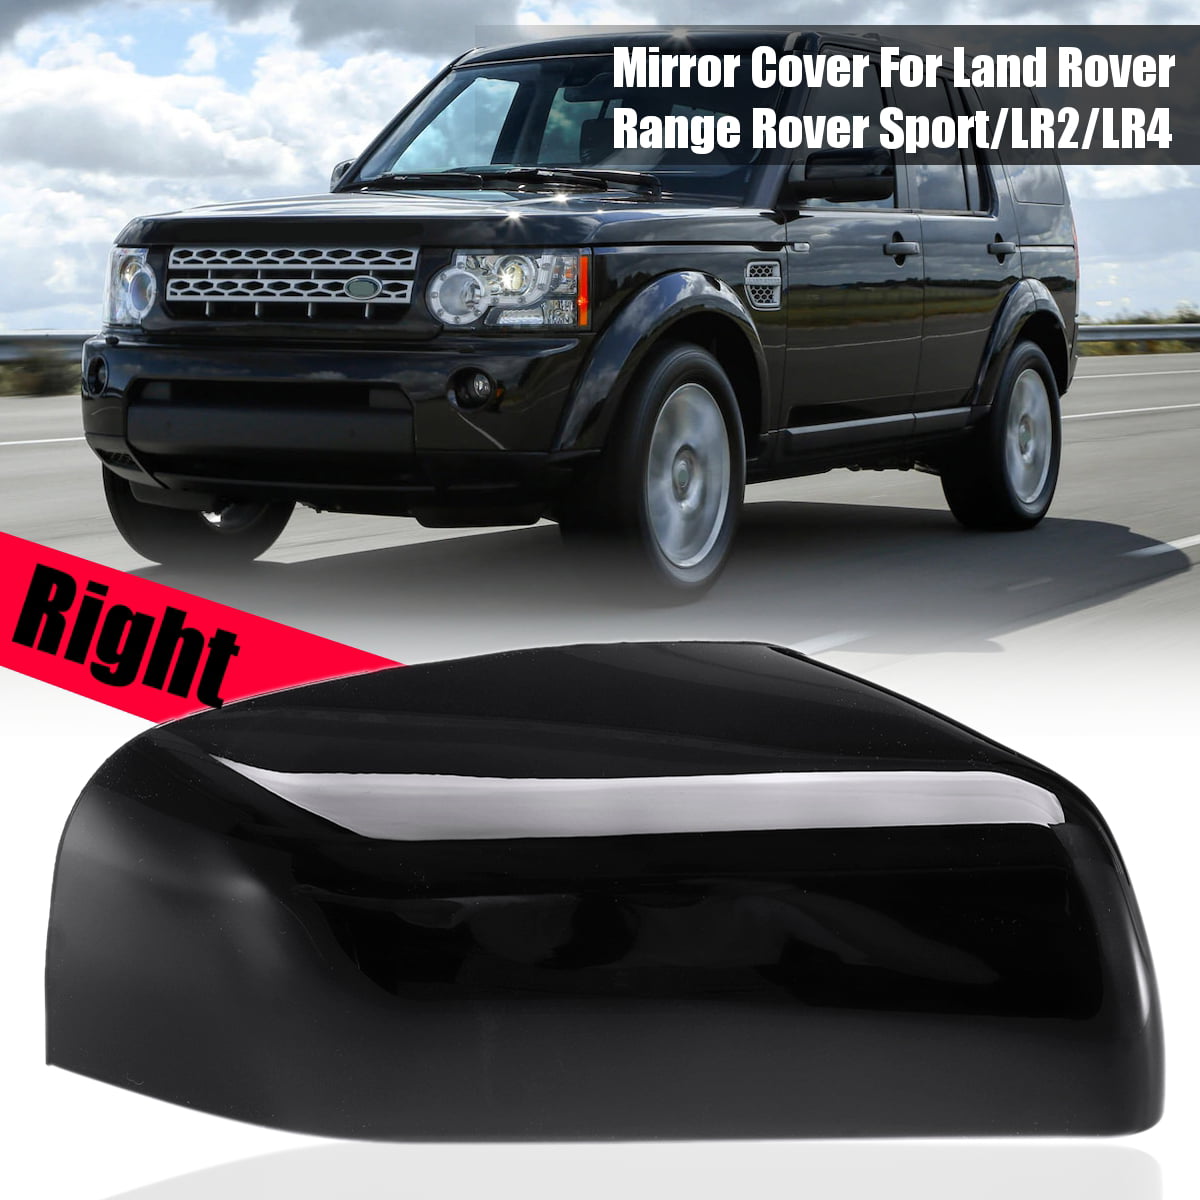 Right Wing Cover Mirror Cap Fit for Land Rover Range Rover Sport LR2 LR4 Rebuilt